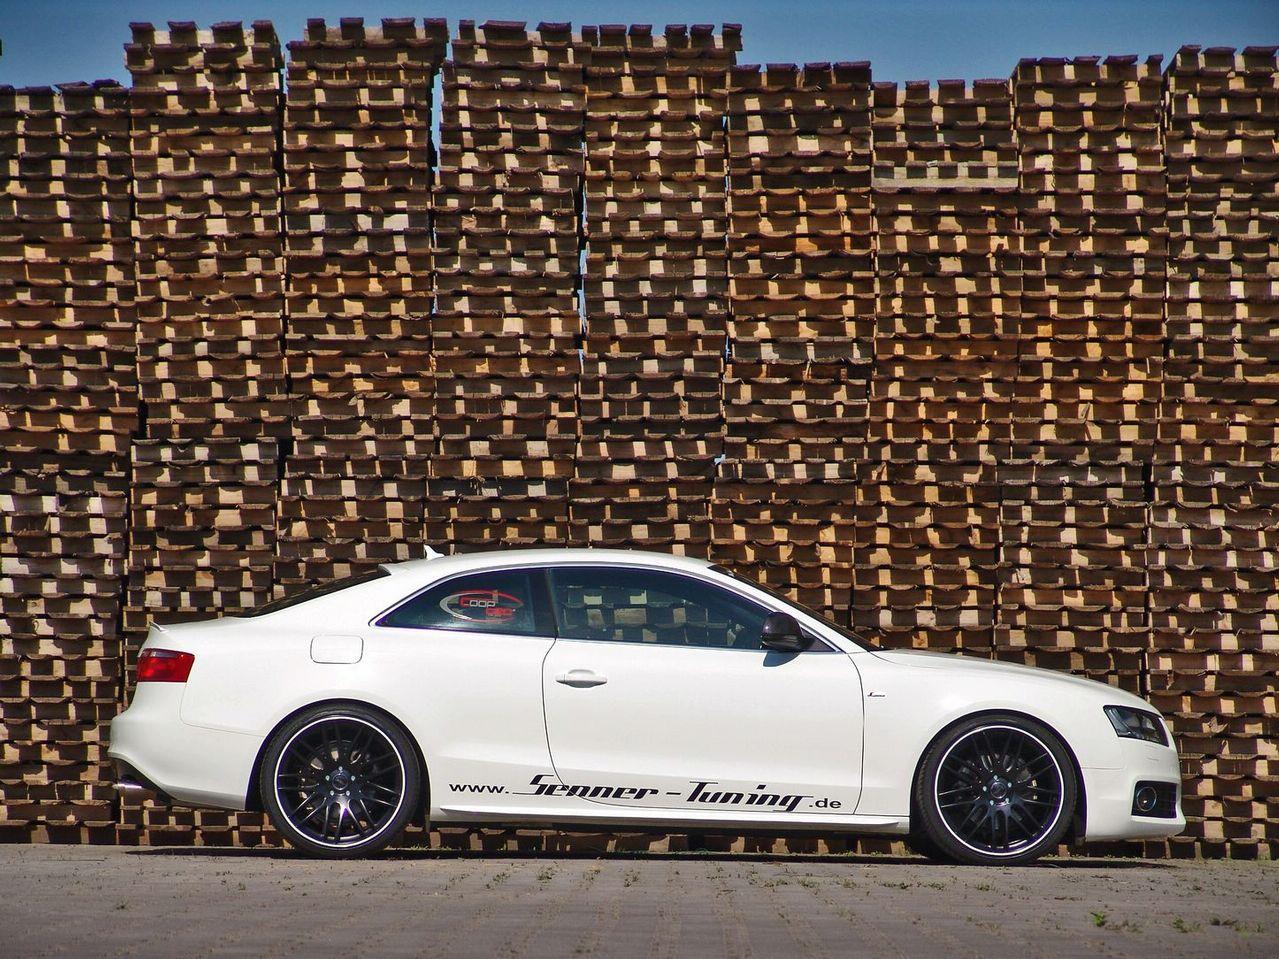 Audi A5 3.0 TDI Black and White by Senner Tuning